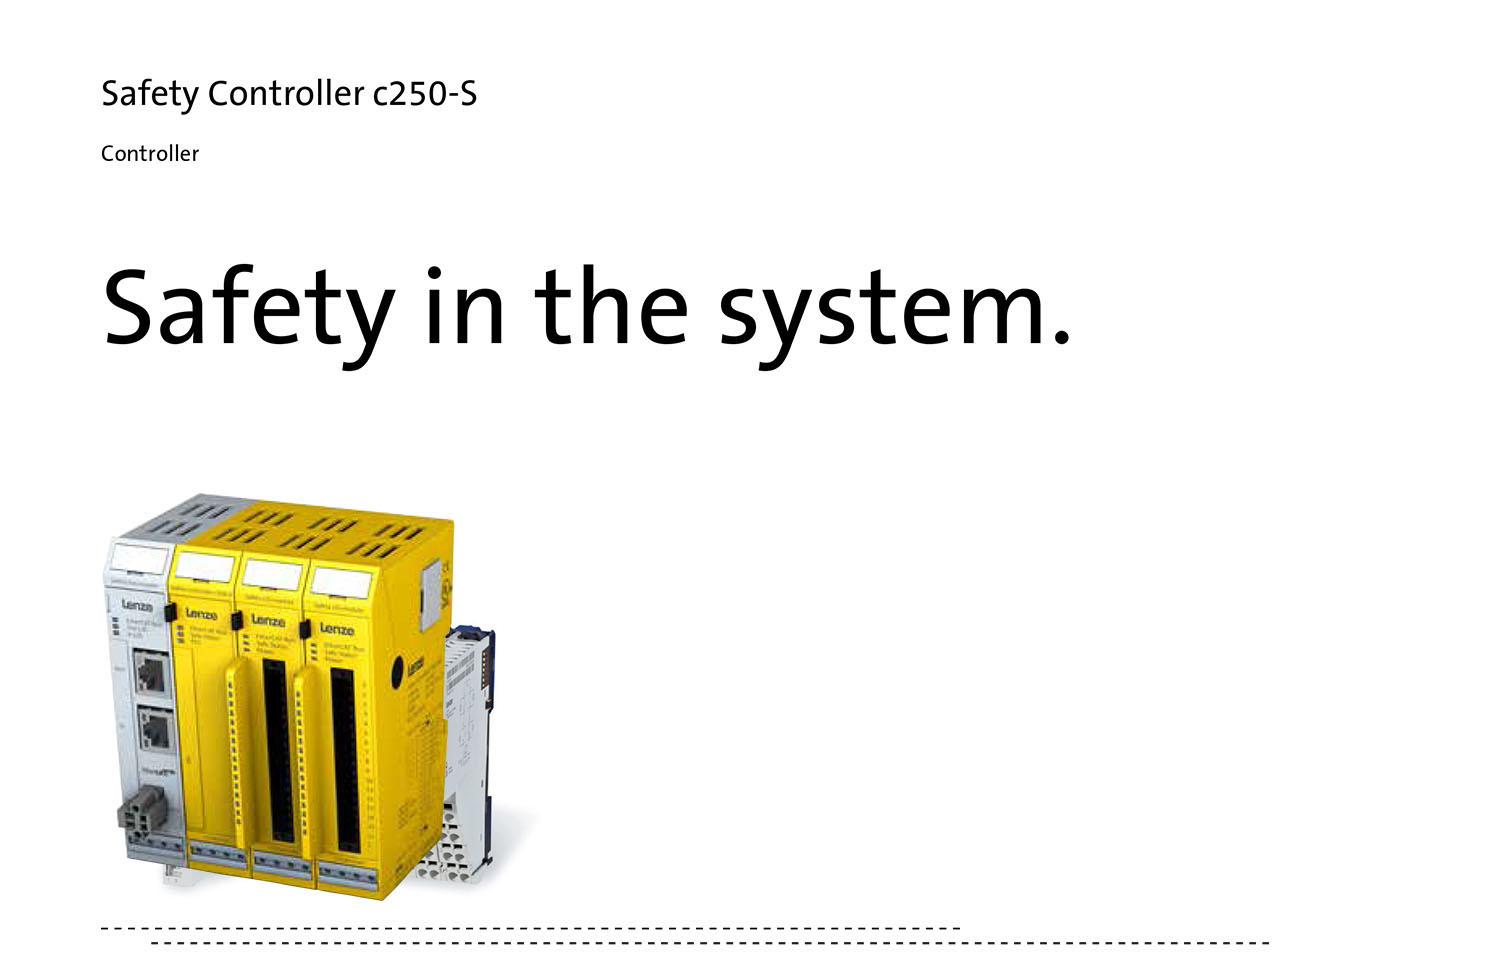 Safety Controller C250-S